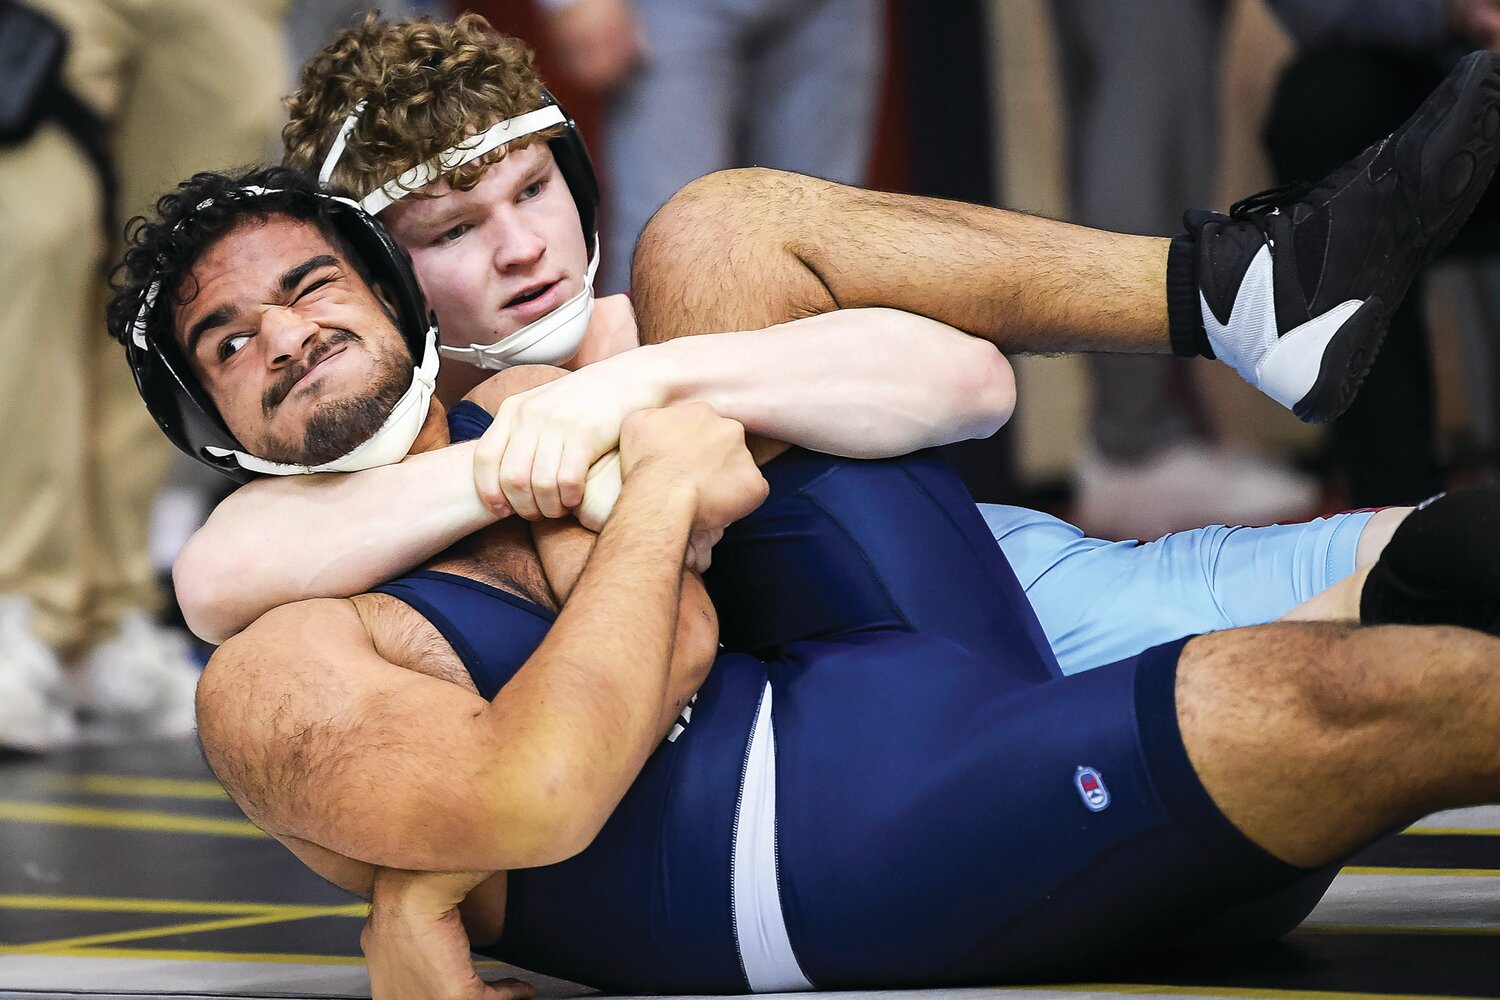 Council Rock North’s Arya Chaudhary feels the grip of Faith Christian’s Cael Wiedemoyer while losing a 160-pound match.